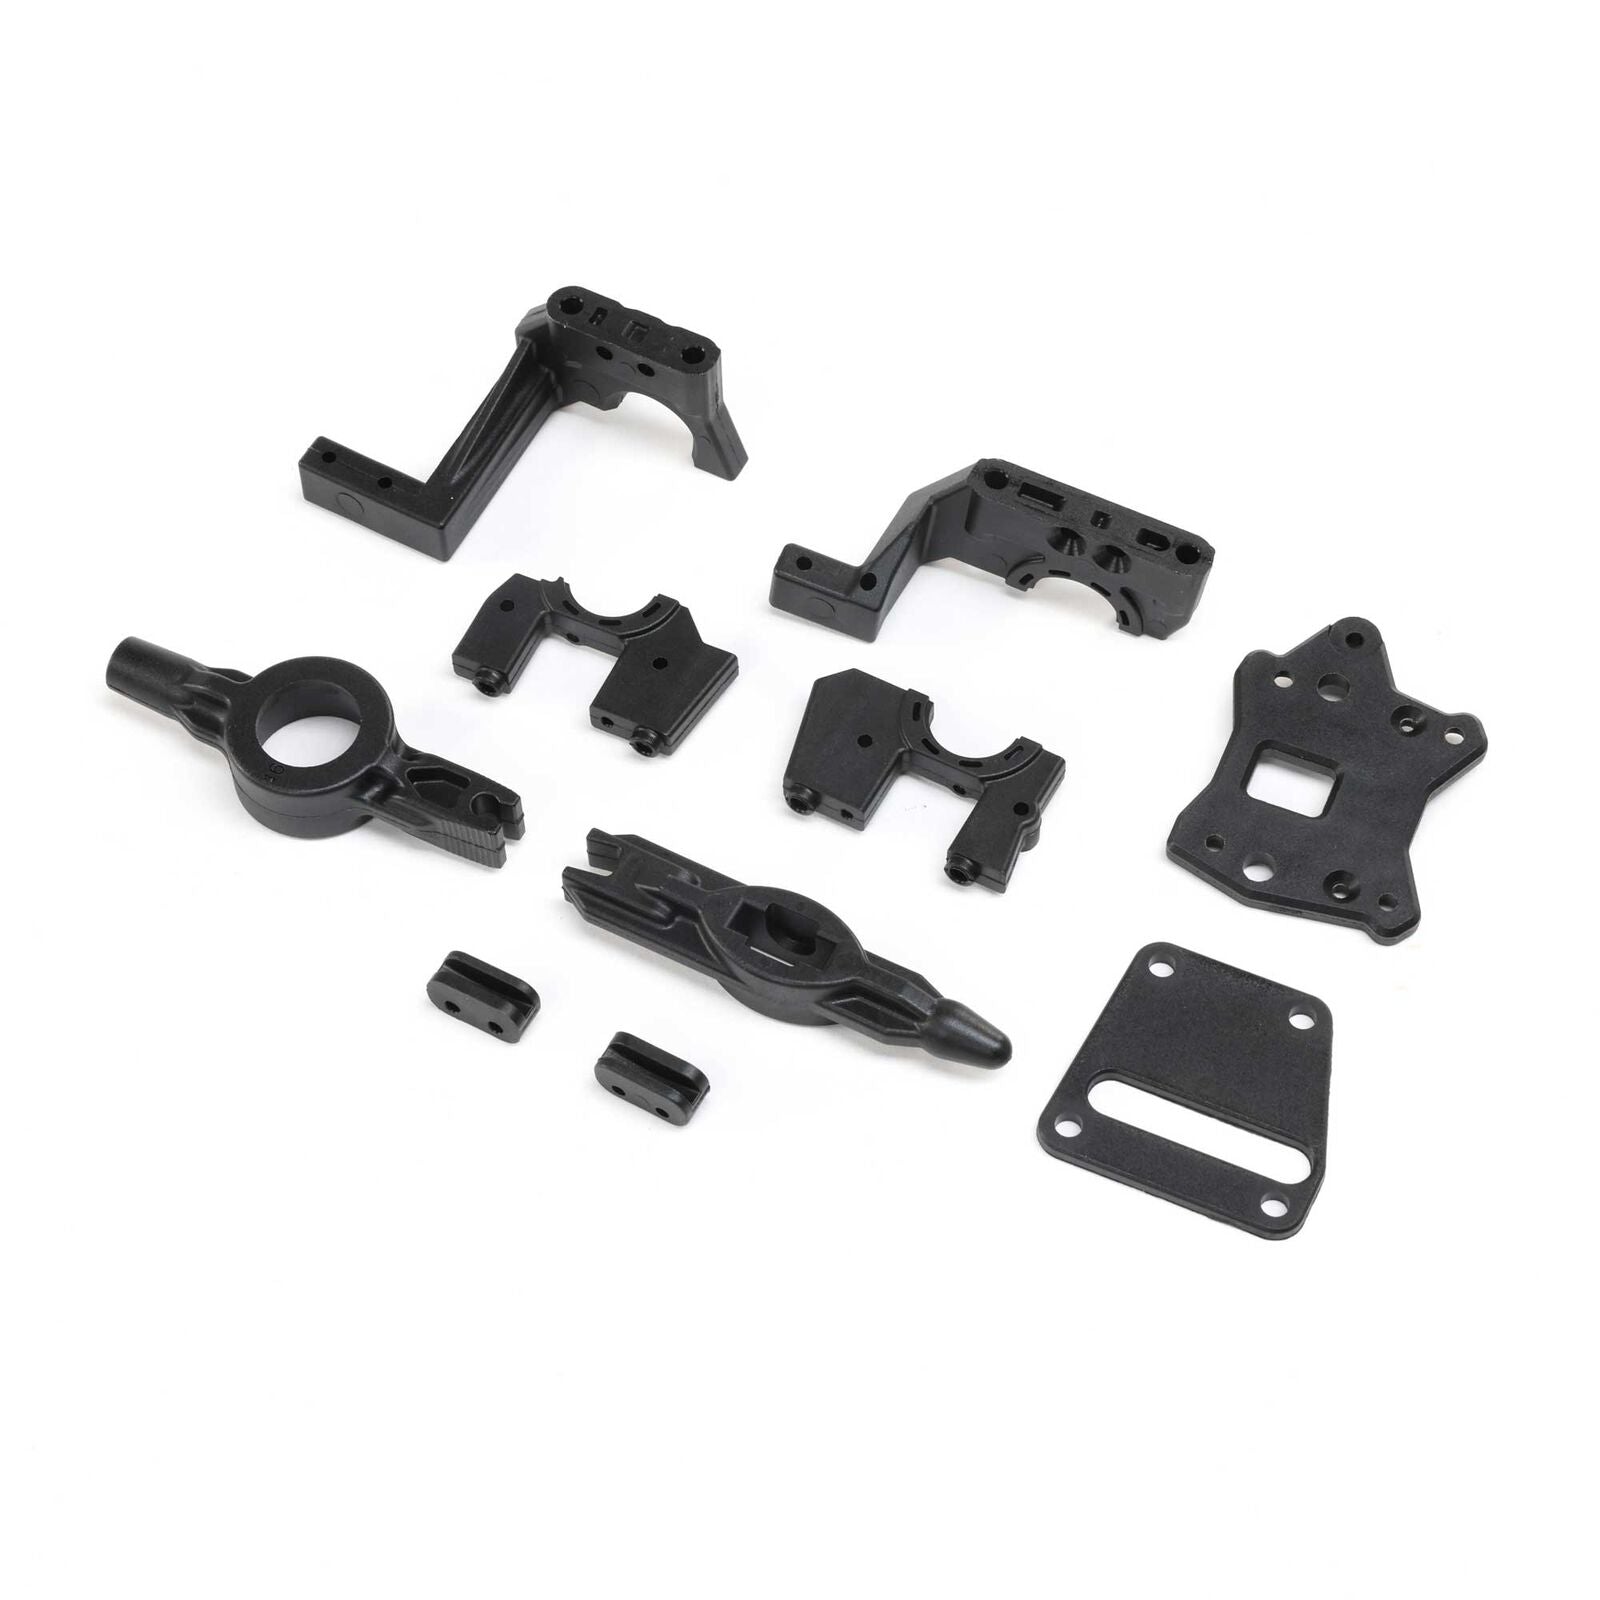 LOSI TLR241069 Center Diff Mounts & Shock Tools: 8X 2.0